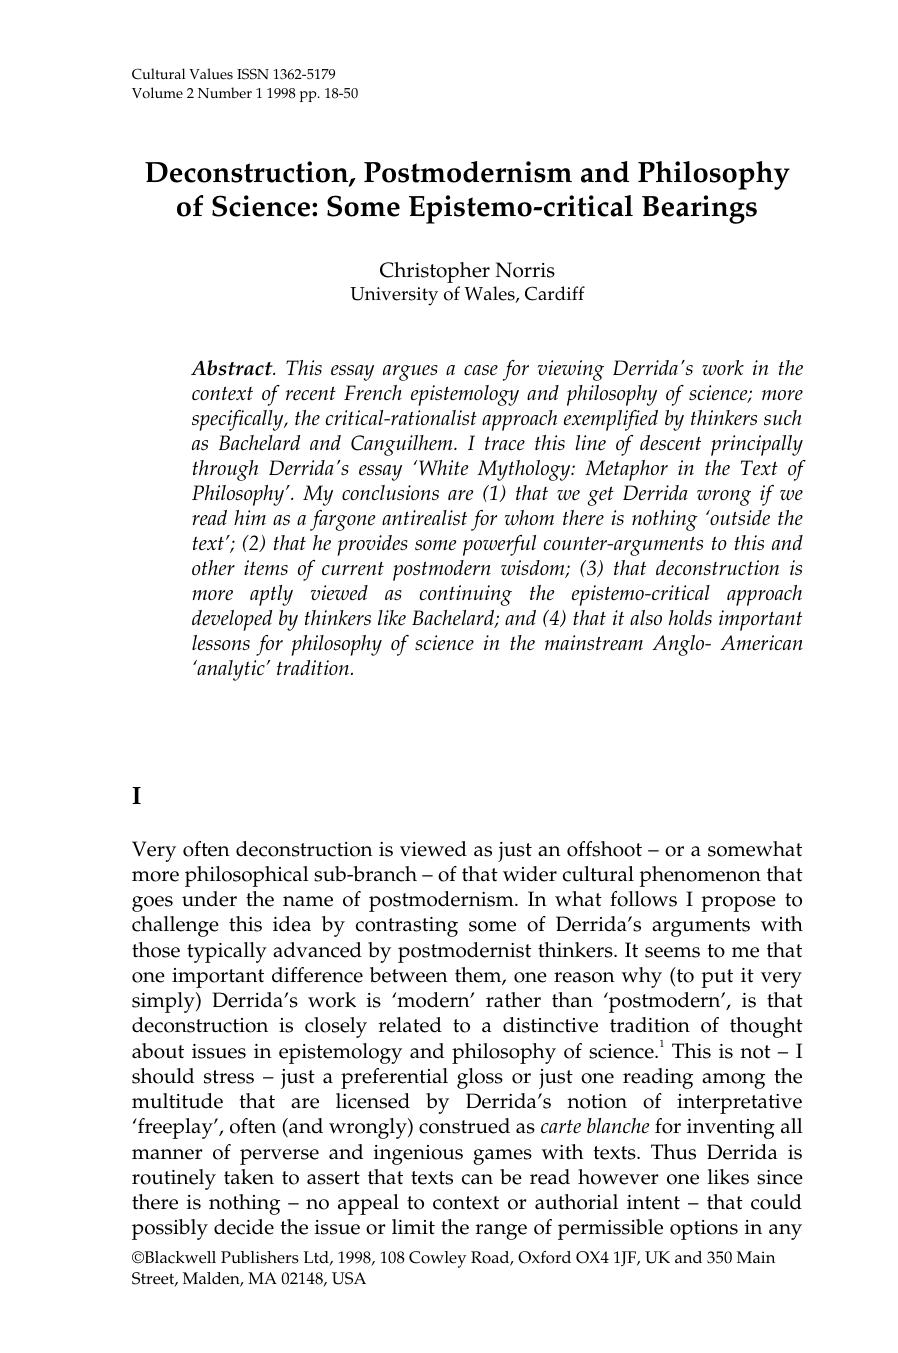 Deconstruction, Postmodernism and Philosophy  of Science: Some Epistemo-critical Bearings - Essay